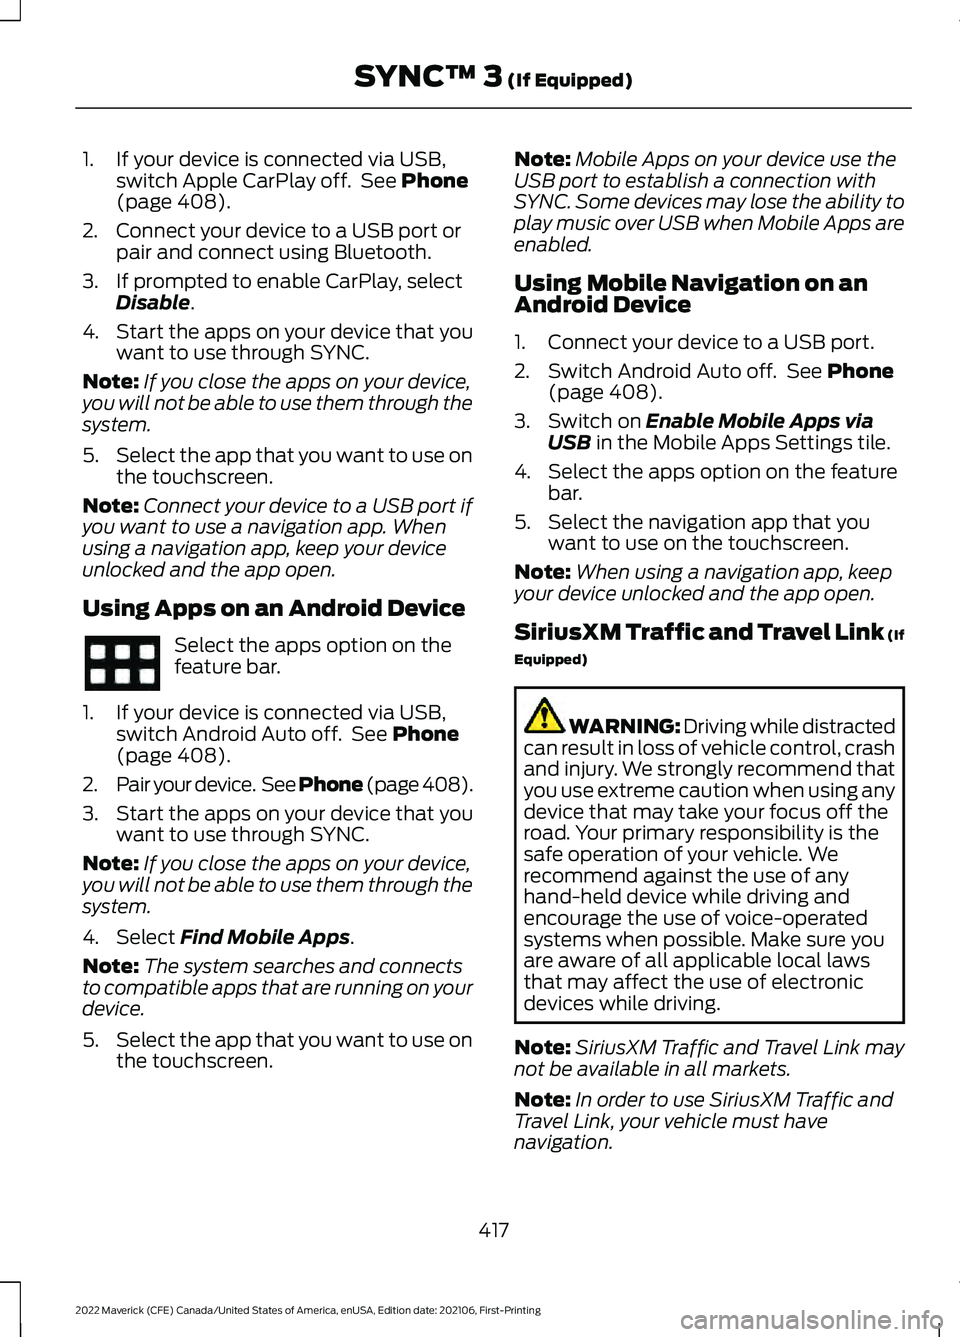 FORD MAVERICK 2022  Owners Manual 1. If your device is connected via USB,
switch Apple CarPlay off.  See Phone
(page 408).
2. Connect your device to a USB port or pair and connect using Bluetooth.
3. If prompted to enable CarPlay, sel